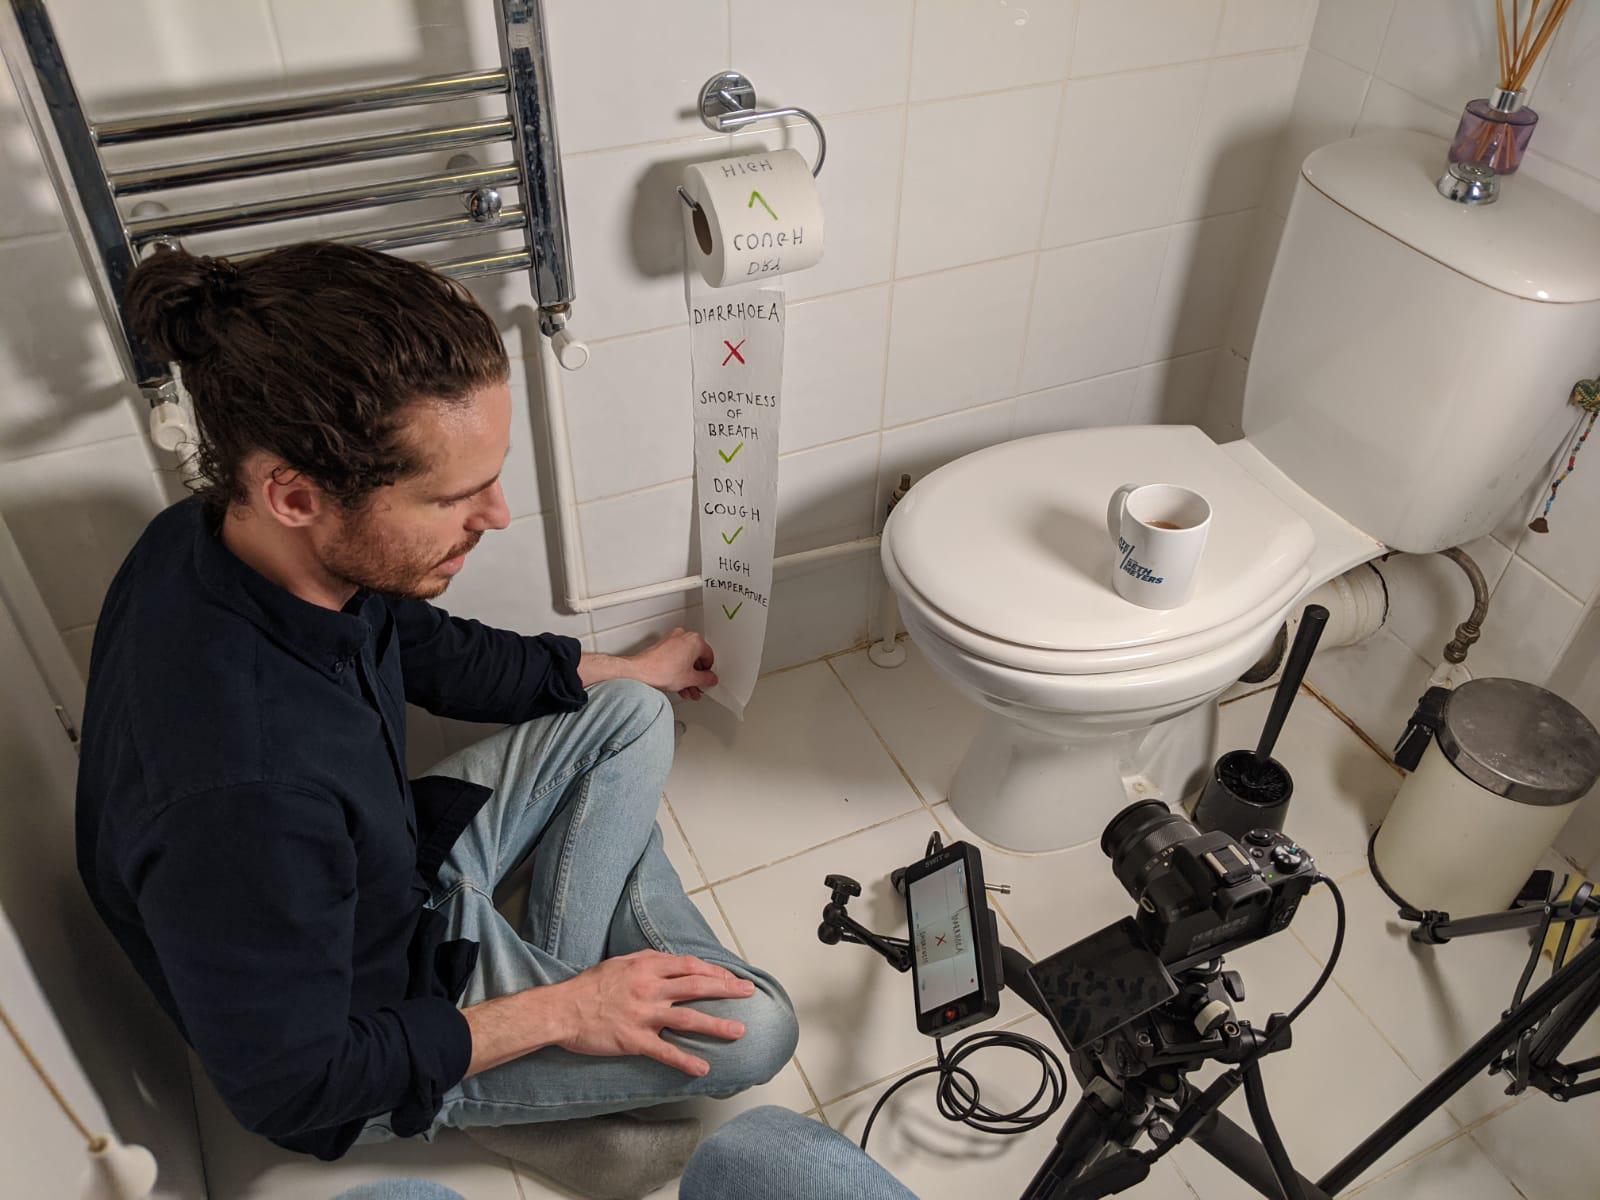 Adam Westbrook and Brendan Miller shooting footage in a bathroom for The New York Times